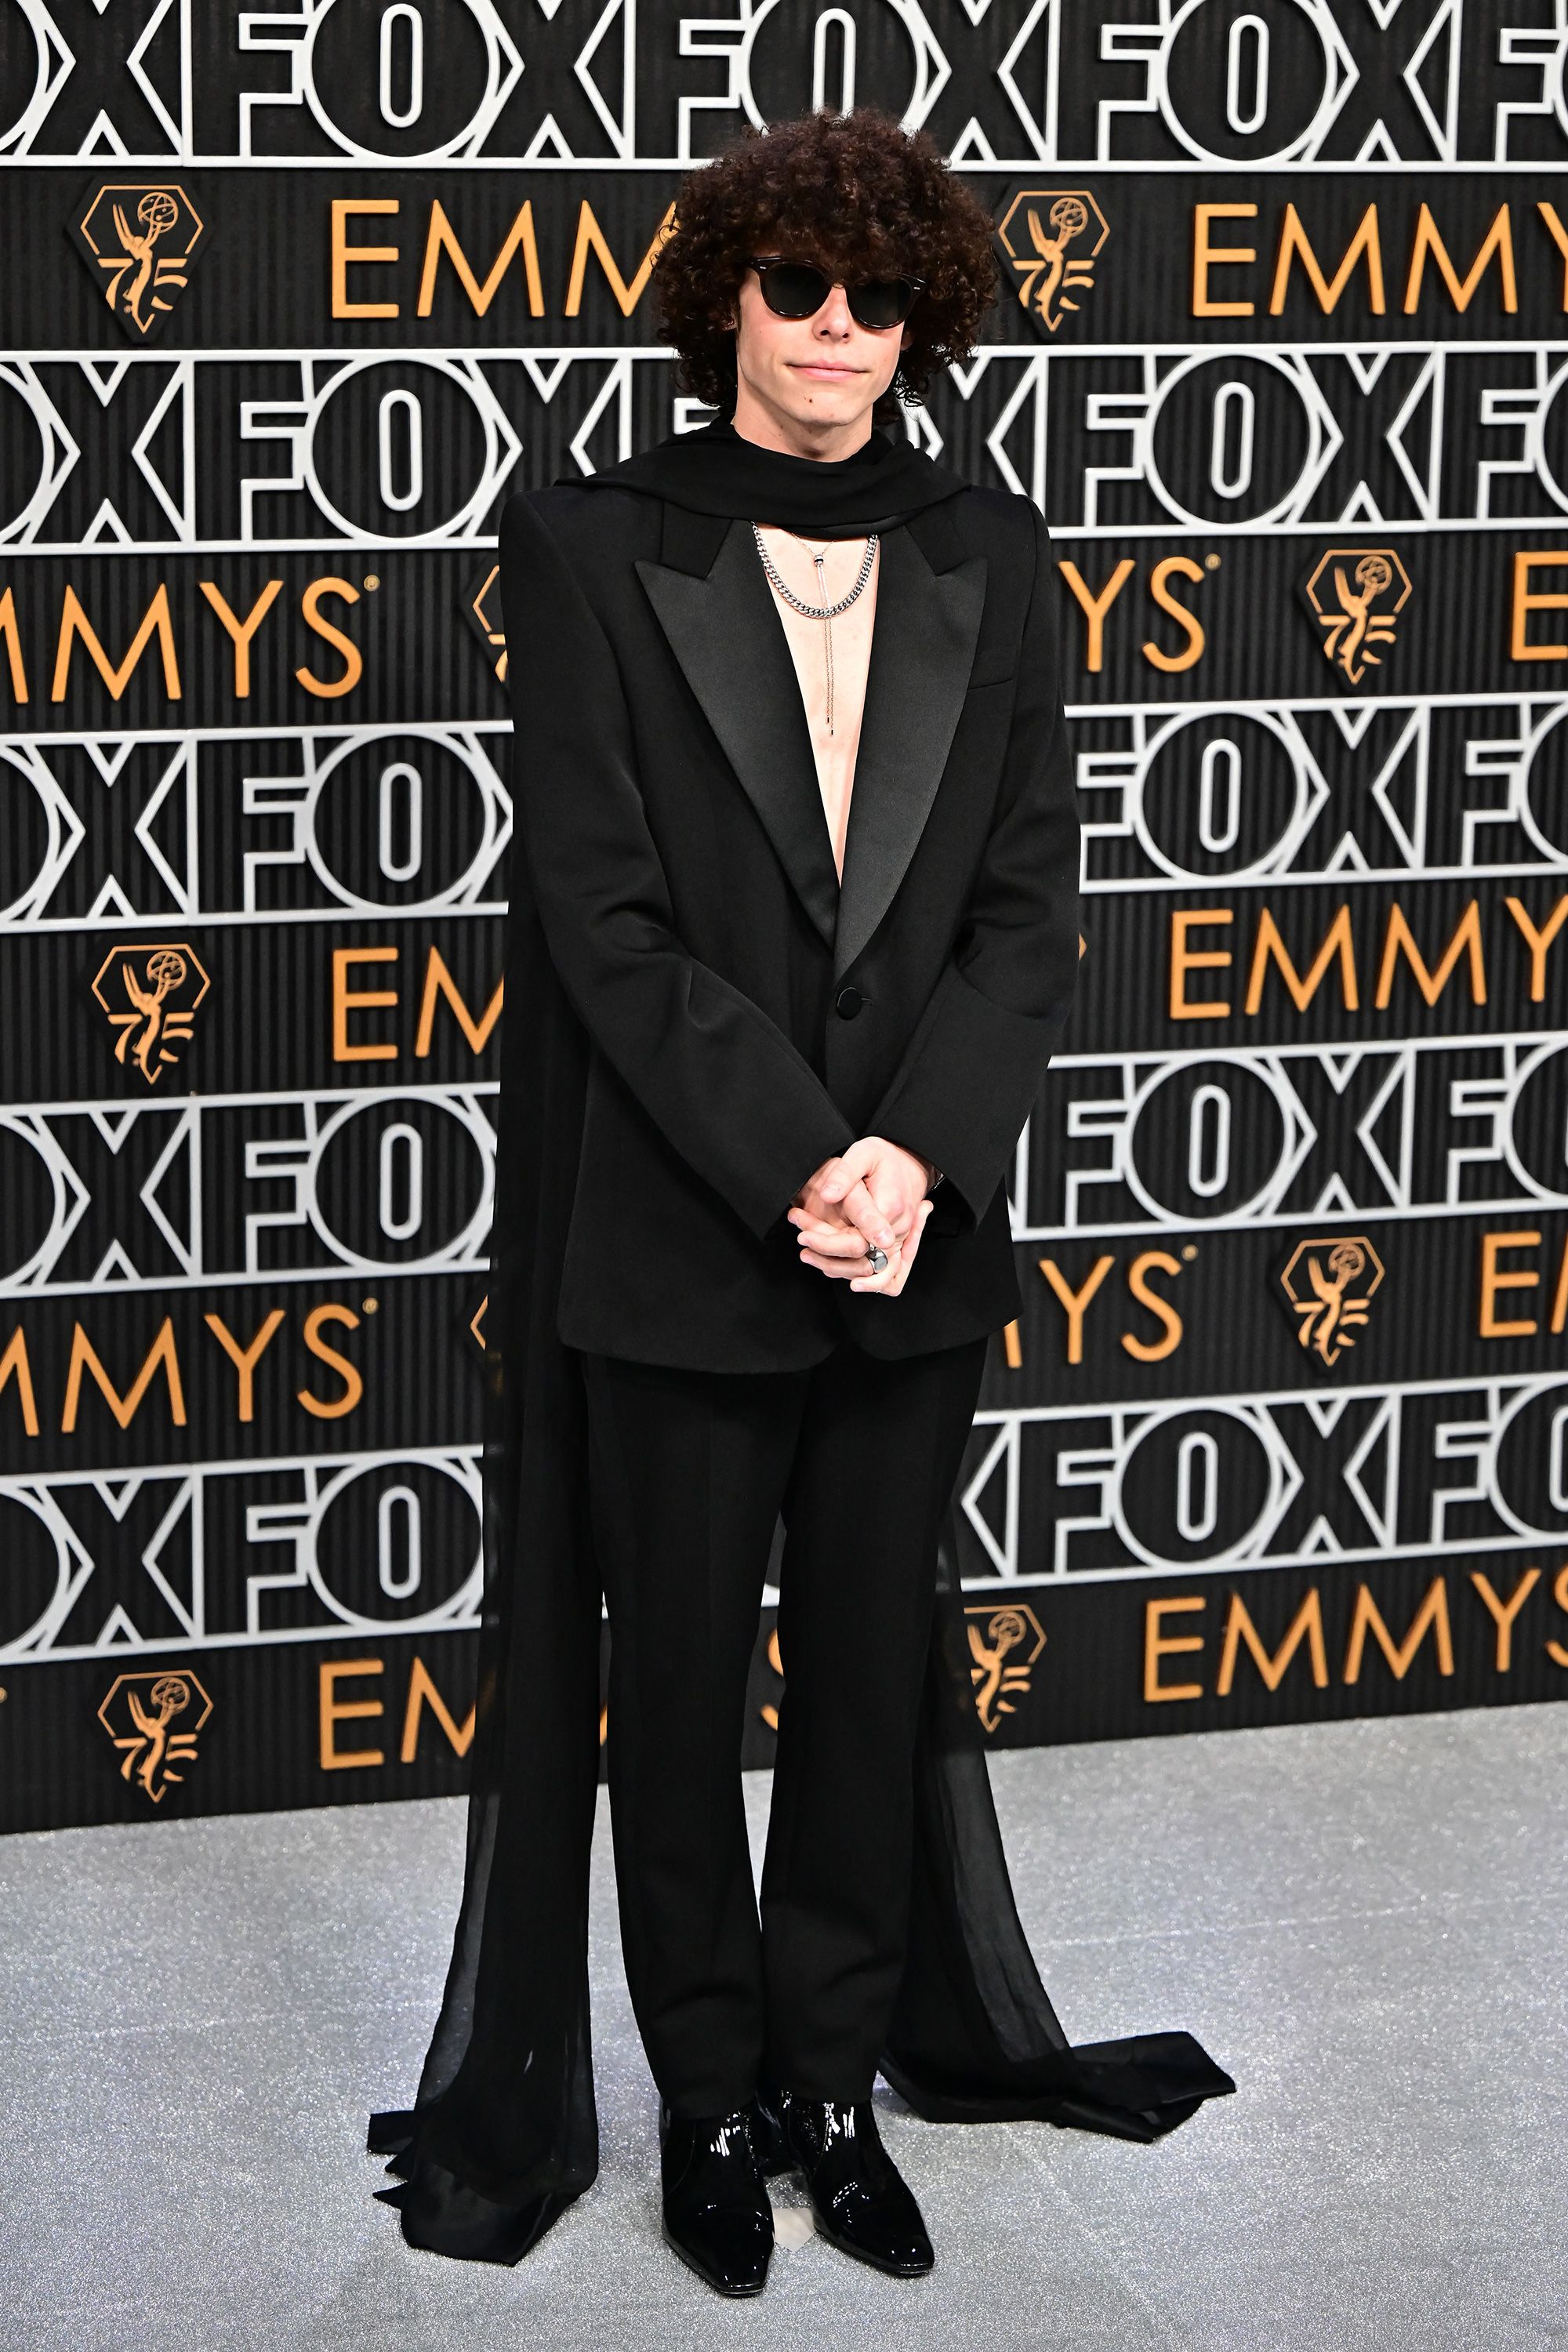 Channeling a little rock glam, actor Reece Feldman opted to go shirtless in a Saint Laurent tuxedo, trailing black scarf and silver jewelry.